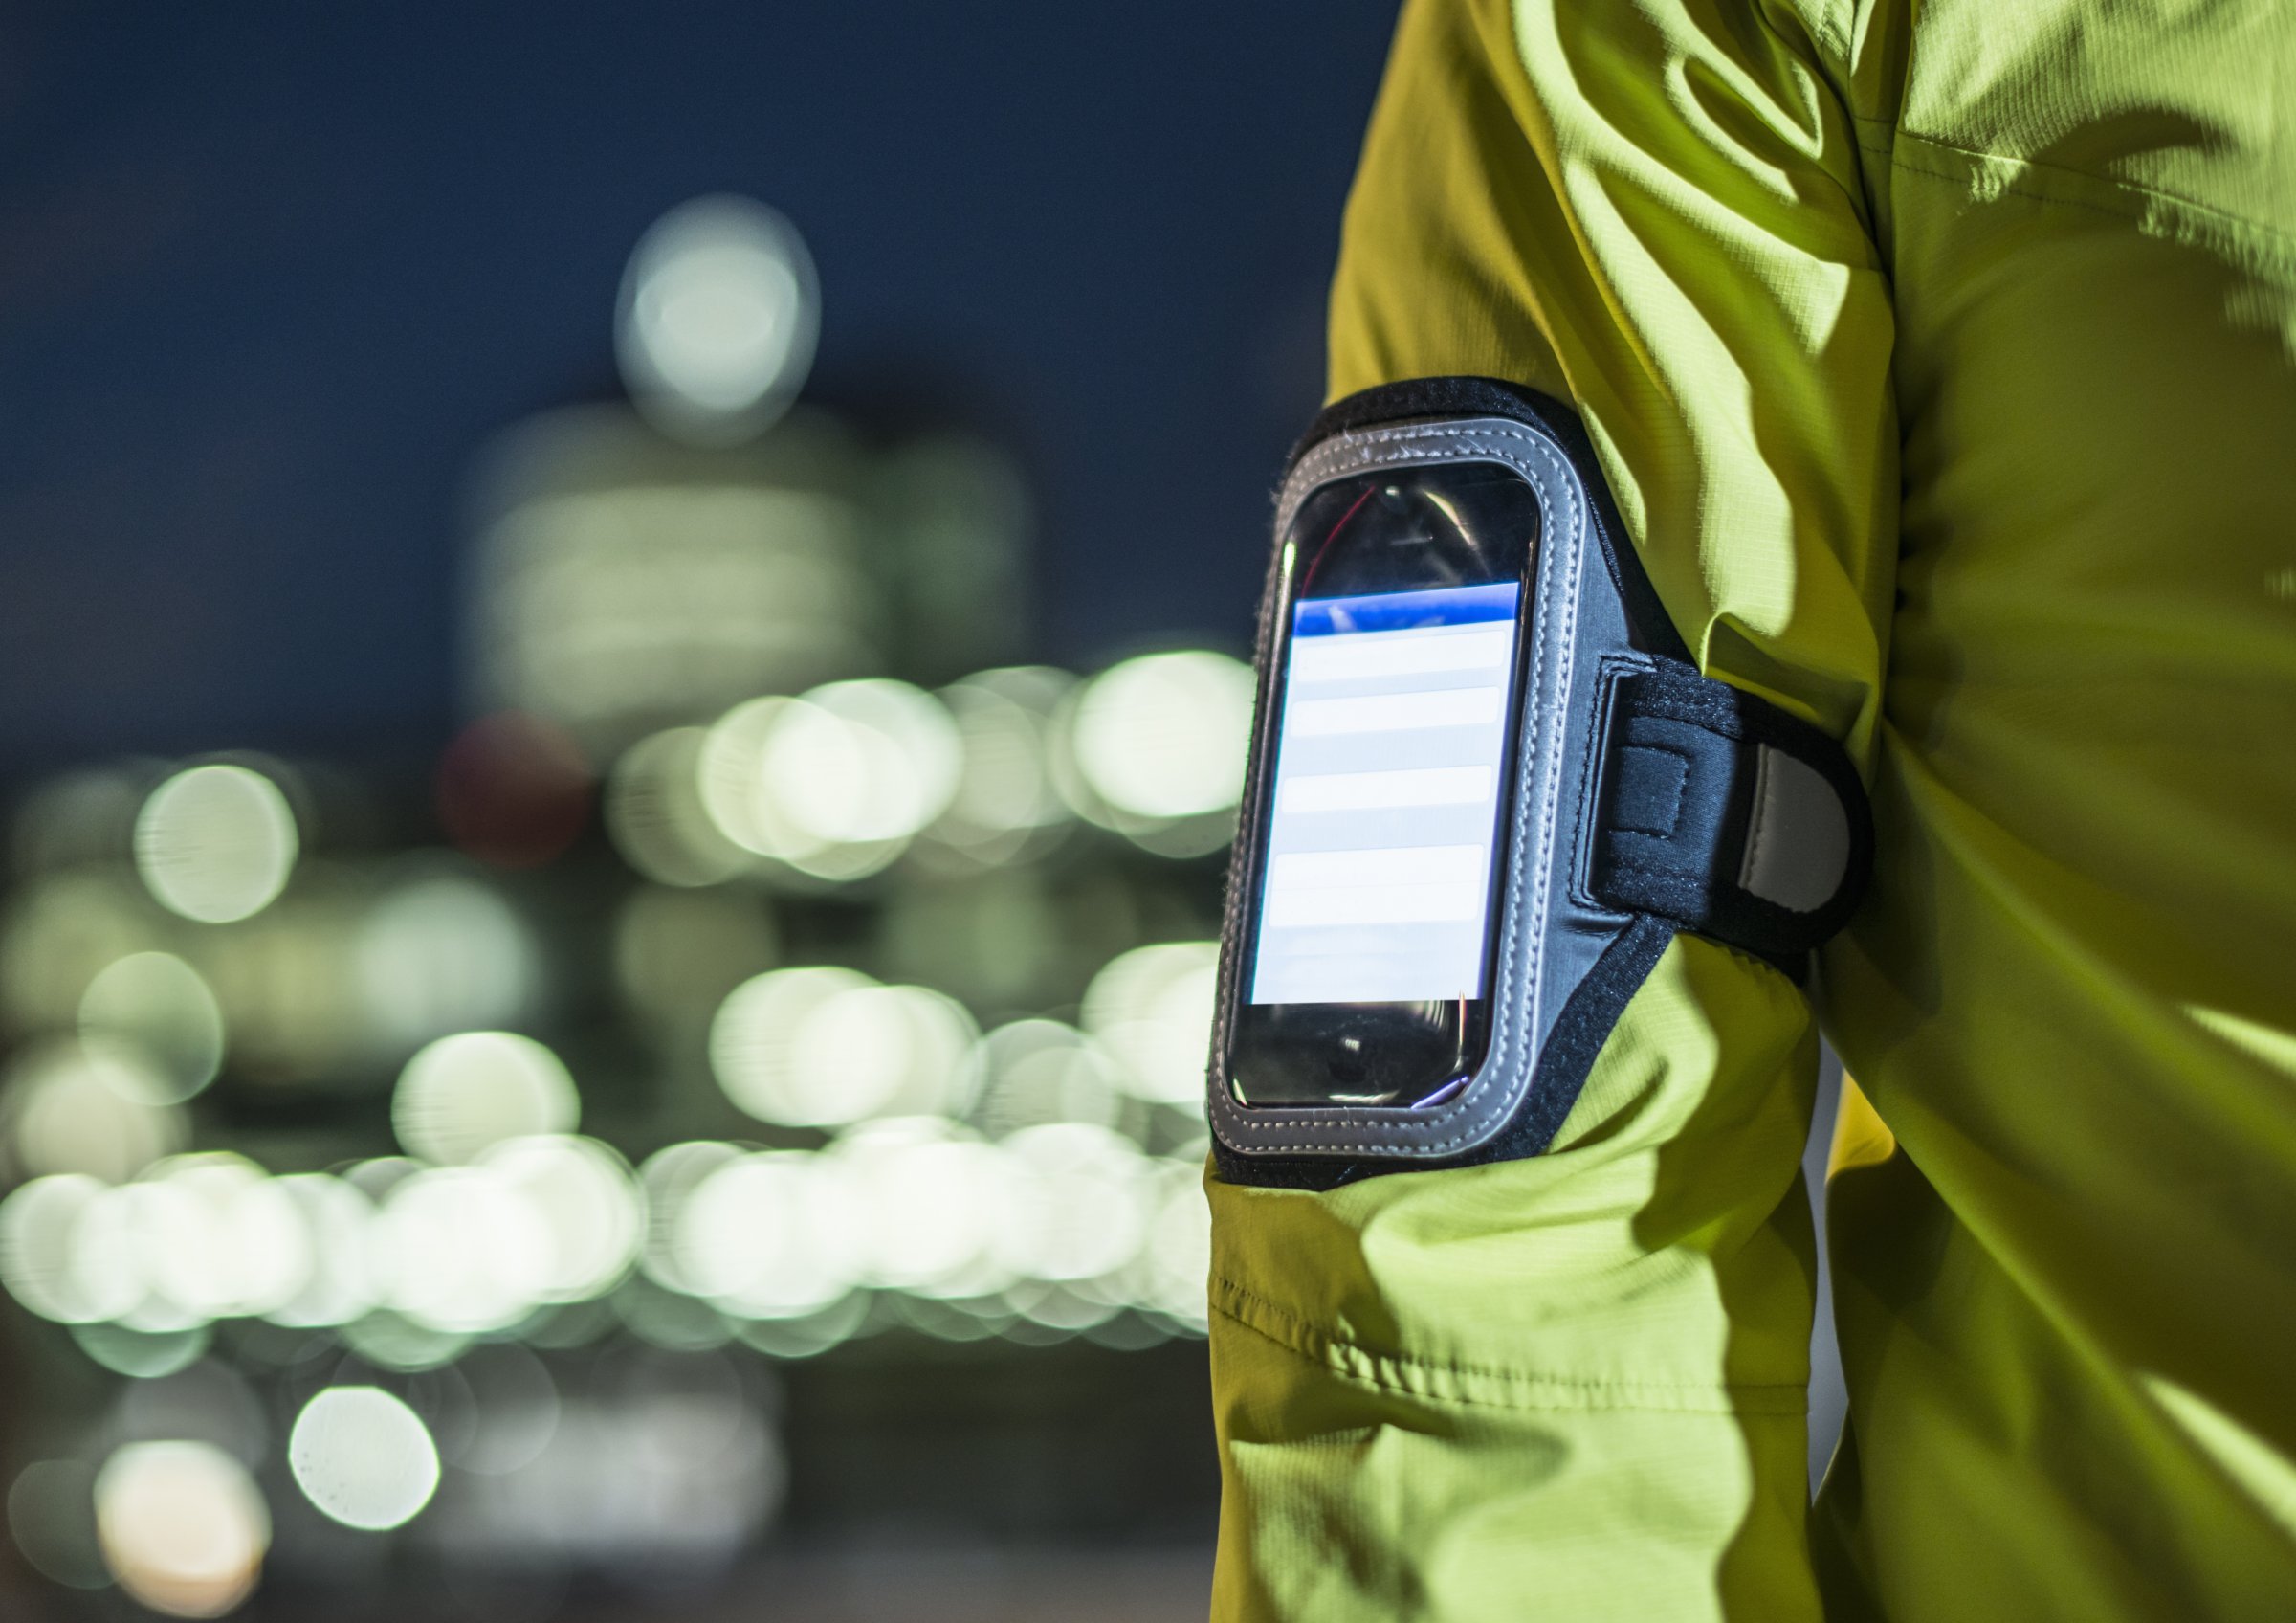 Runner wearing smartphone on arm in city